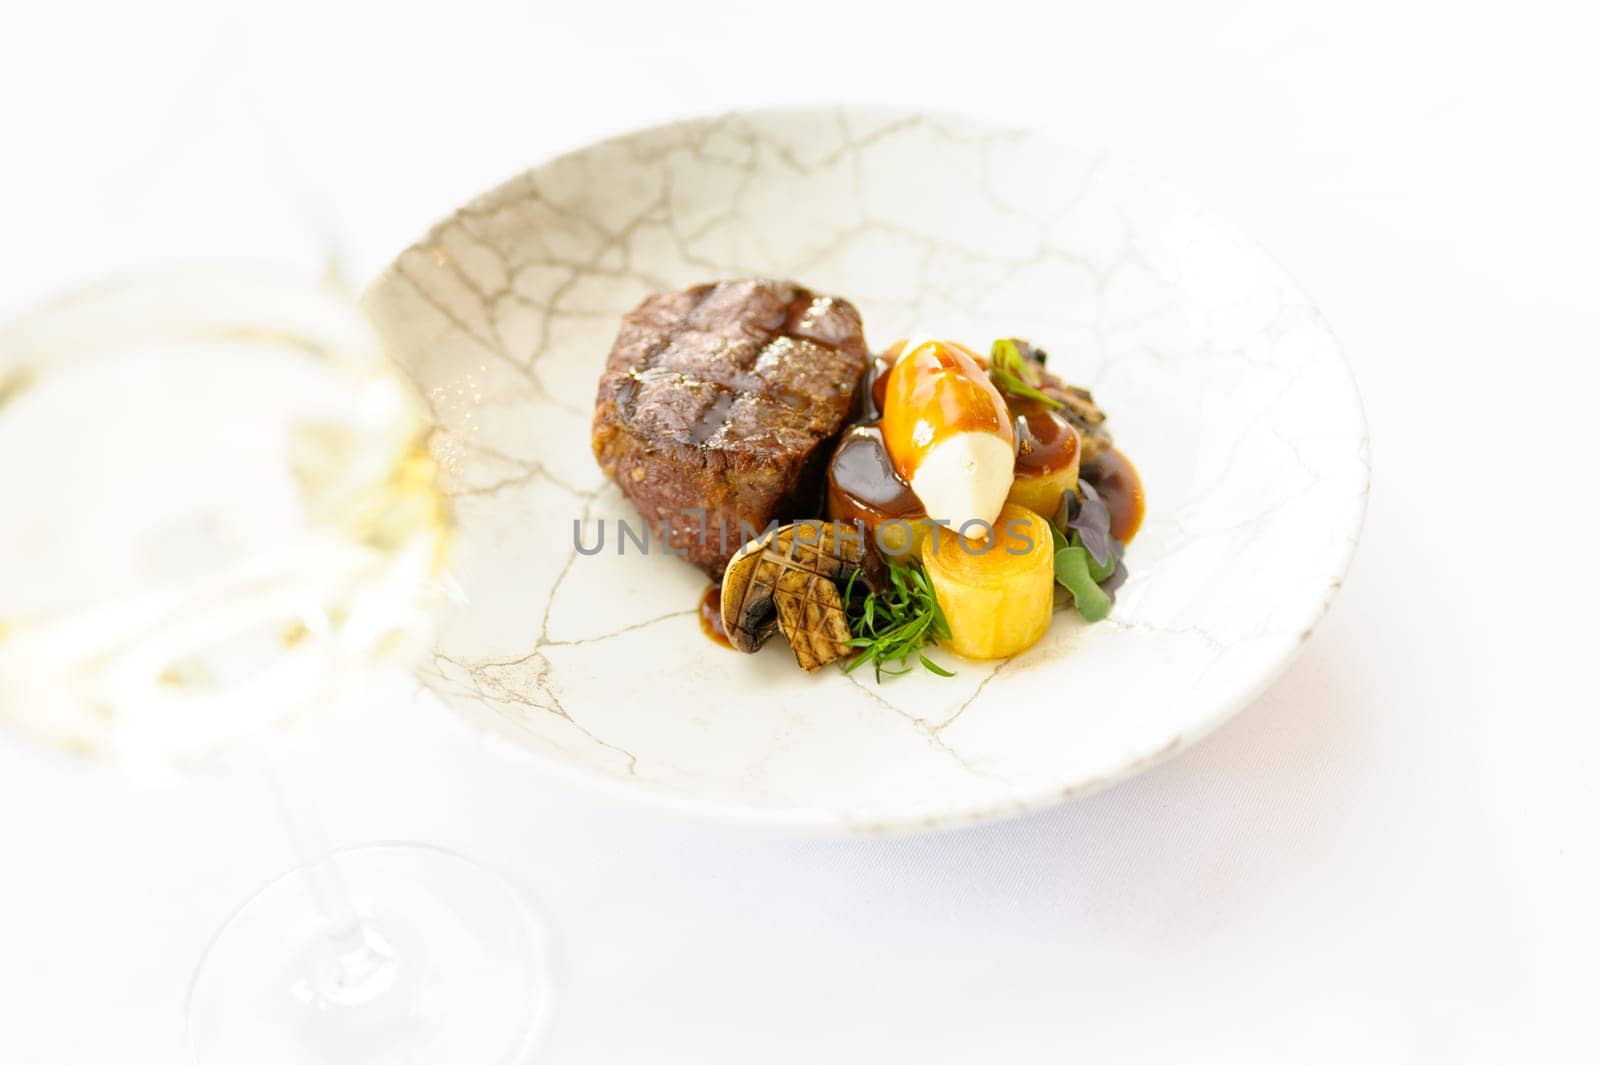 Exquisite serving of beef steak on a white plate on a white background